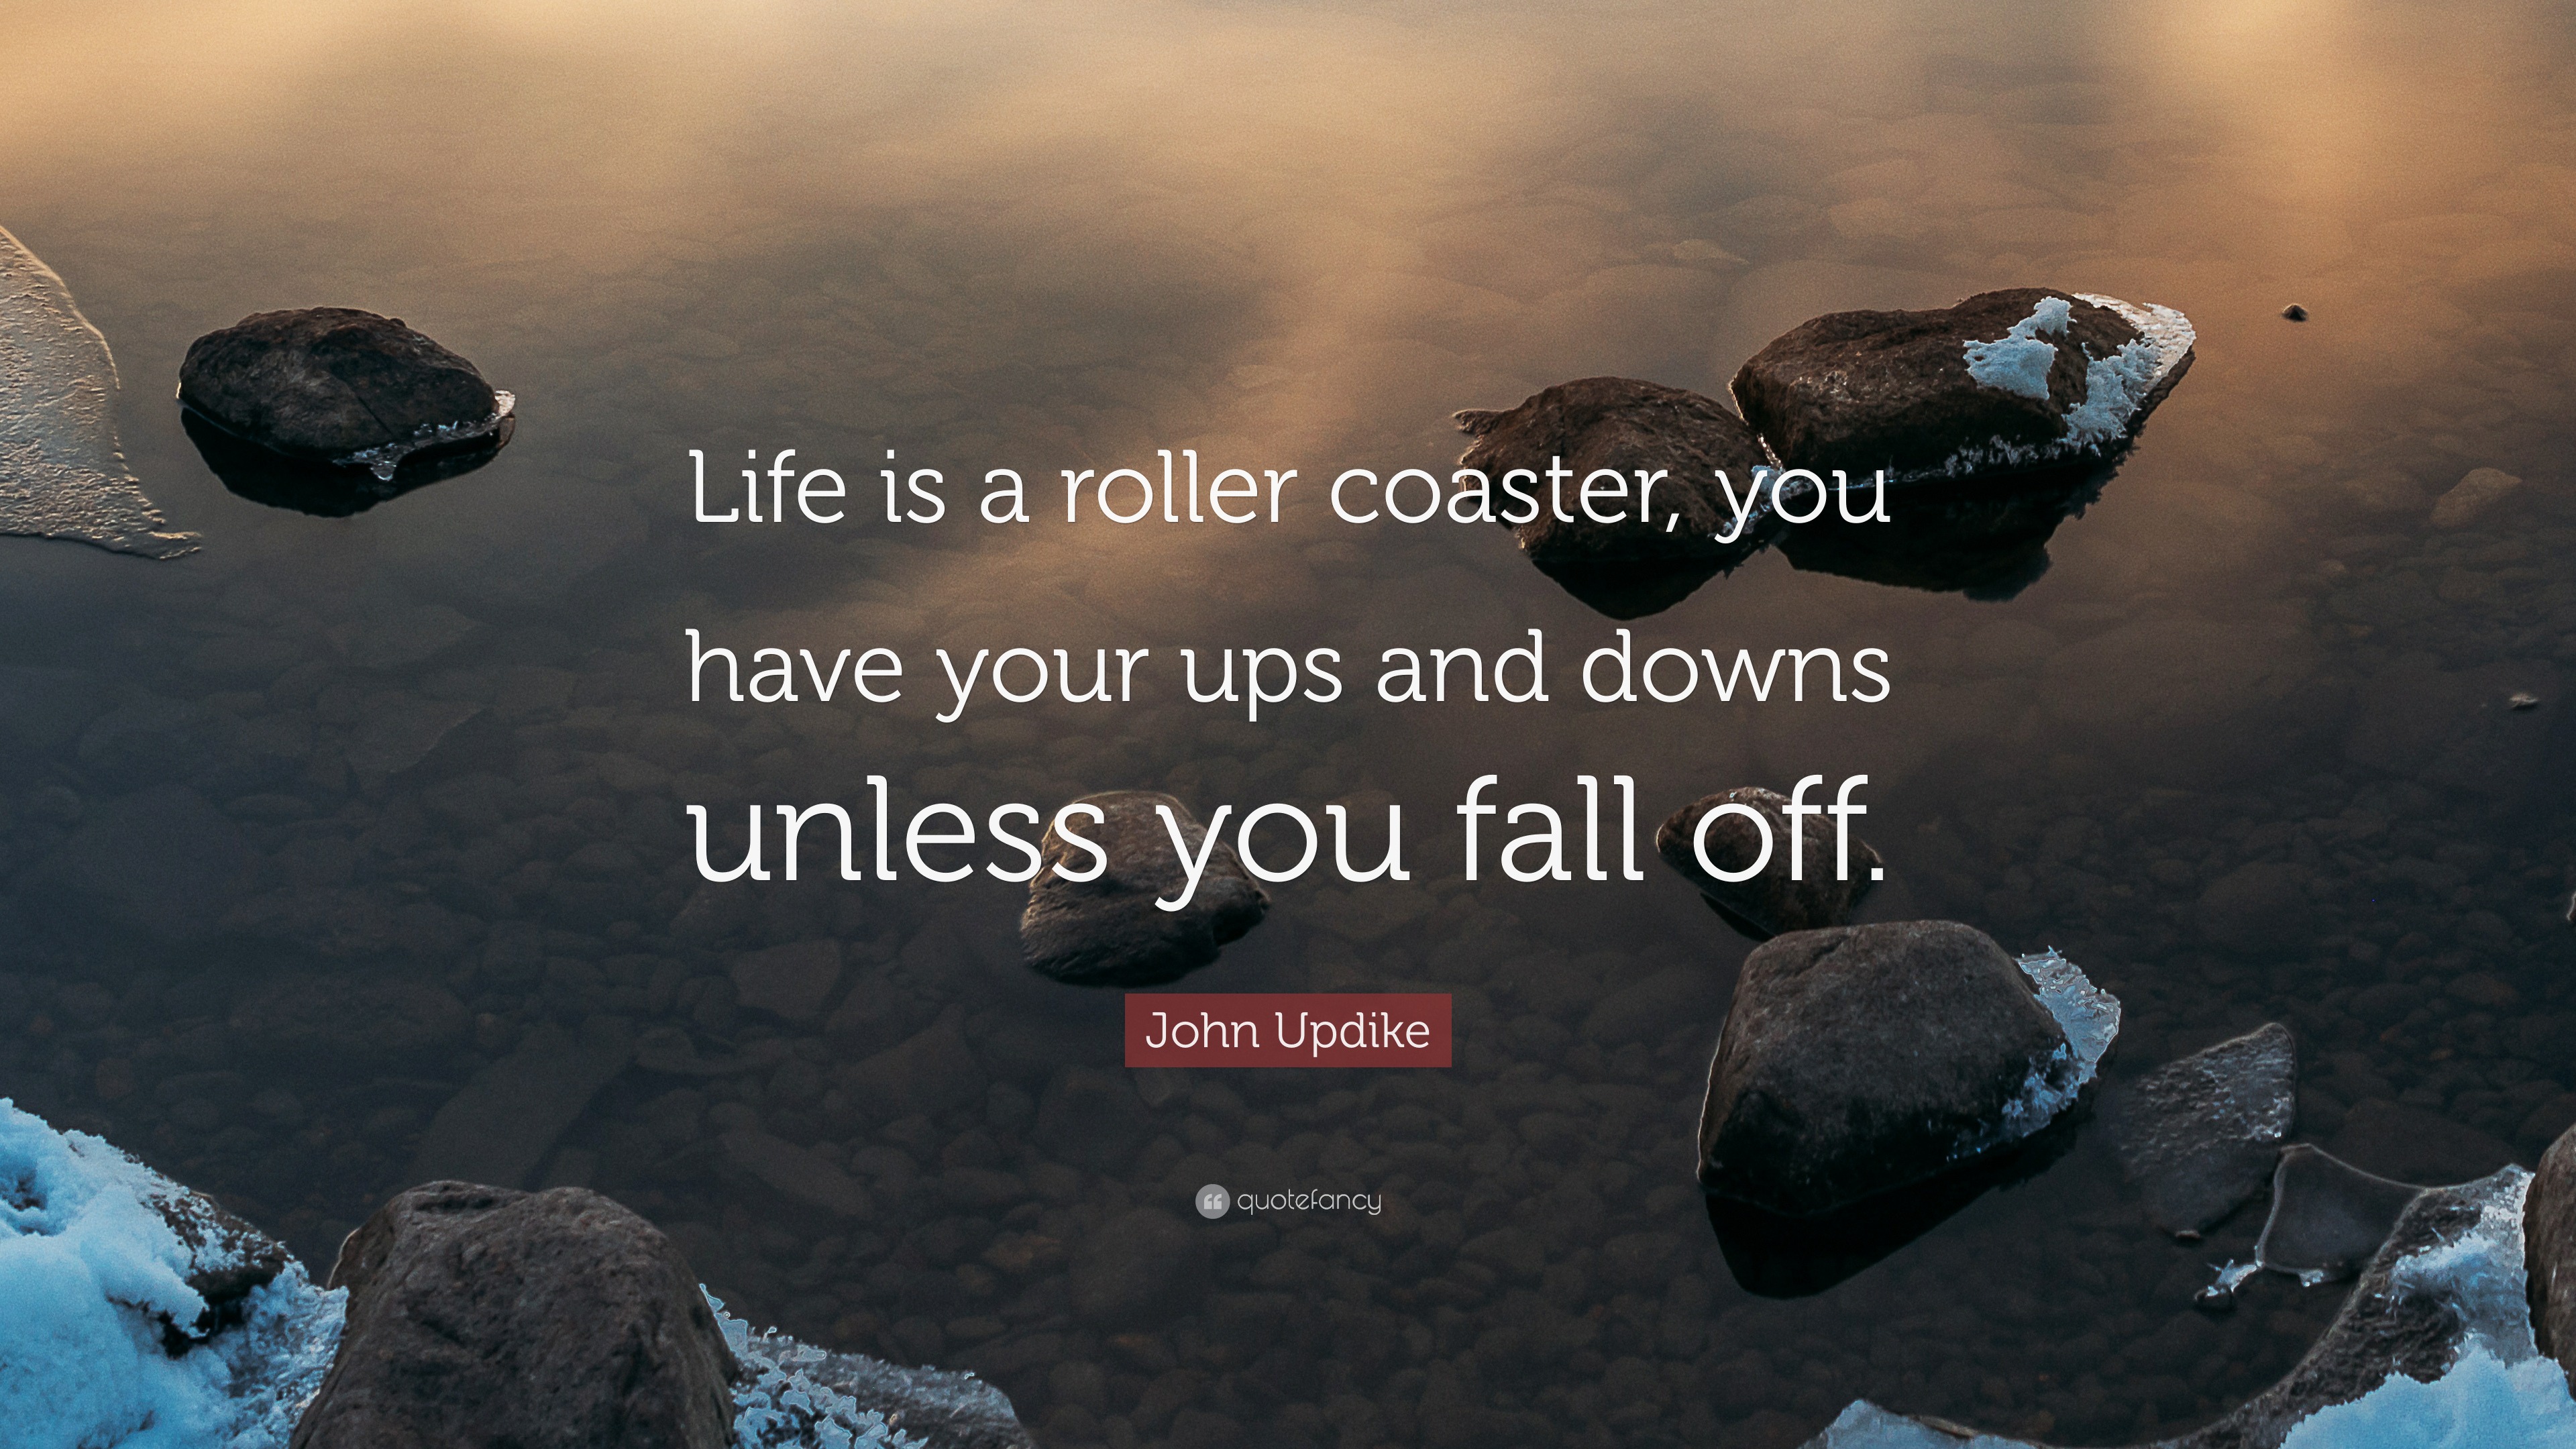 John Updike Quote: “Life is a roller coaster, you have your ups and ...